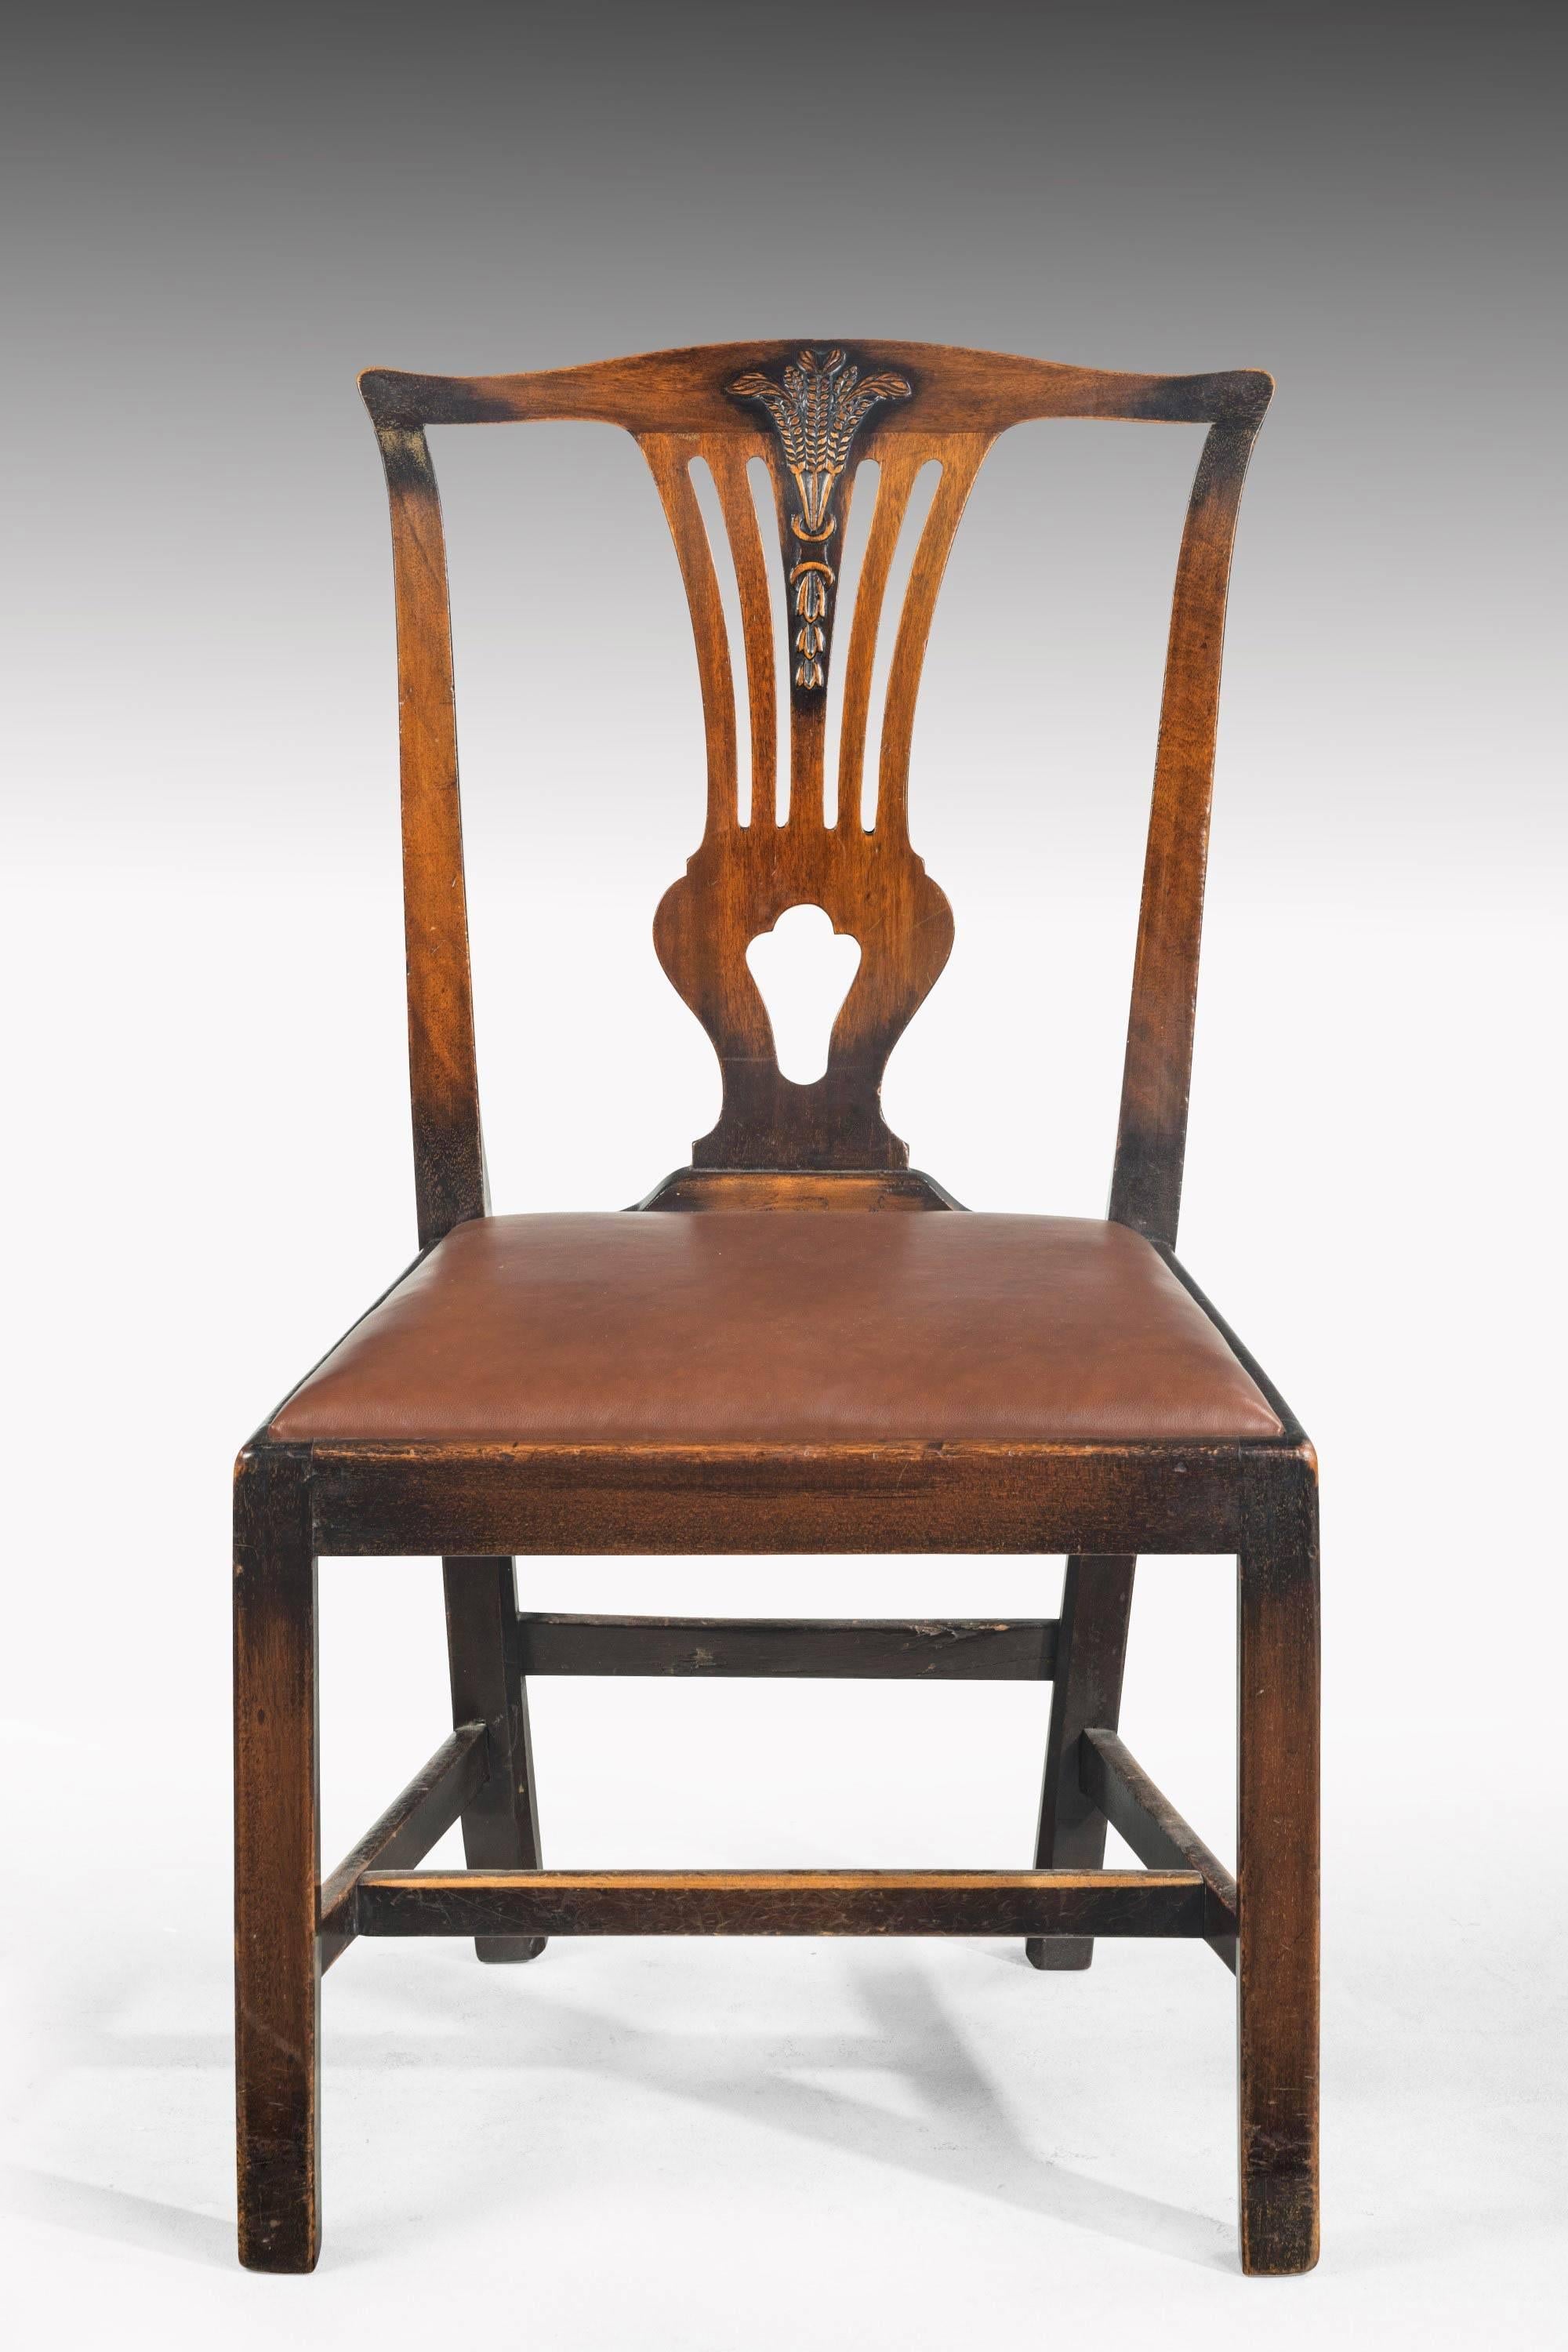 A set of five George III mahogany dining chairs, en suite with 7612. The pieced back splat topped with Prince of Wales feathers and hair bell detail to the lower section

Seat height 18.5 inches

 